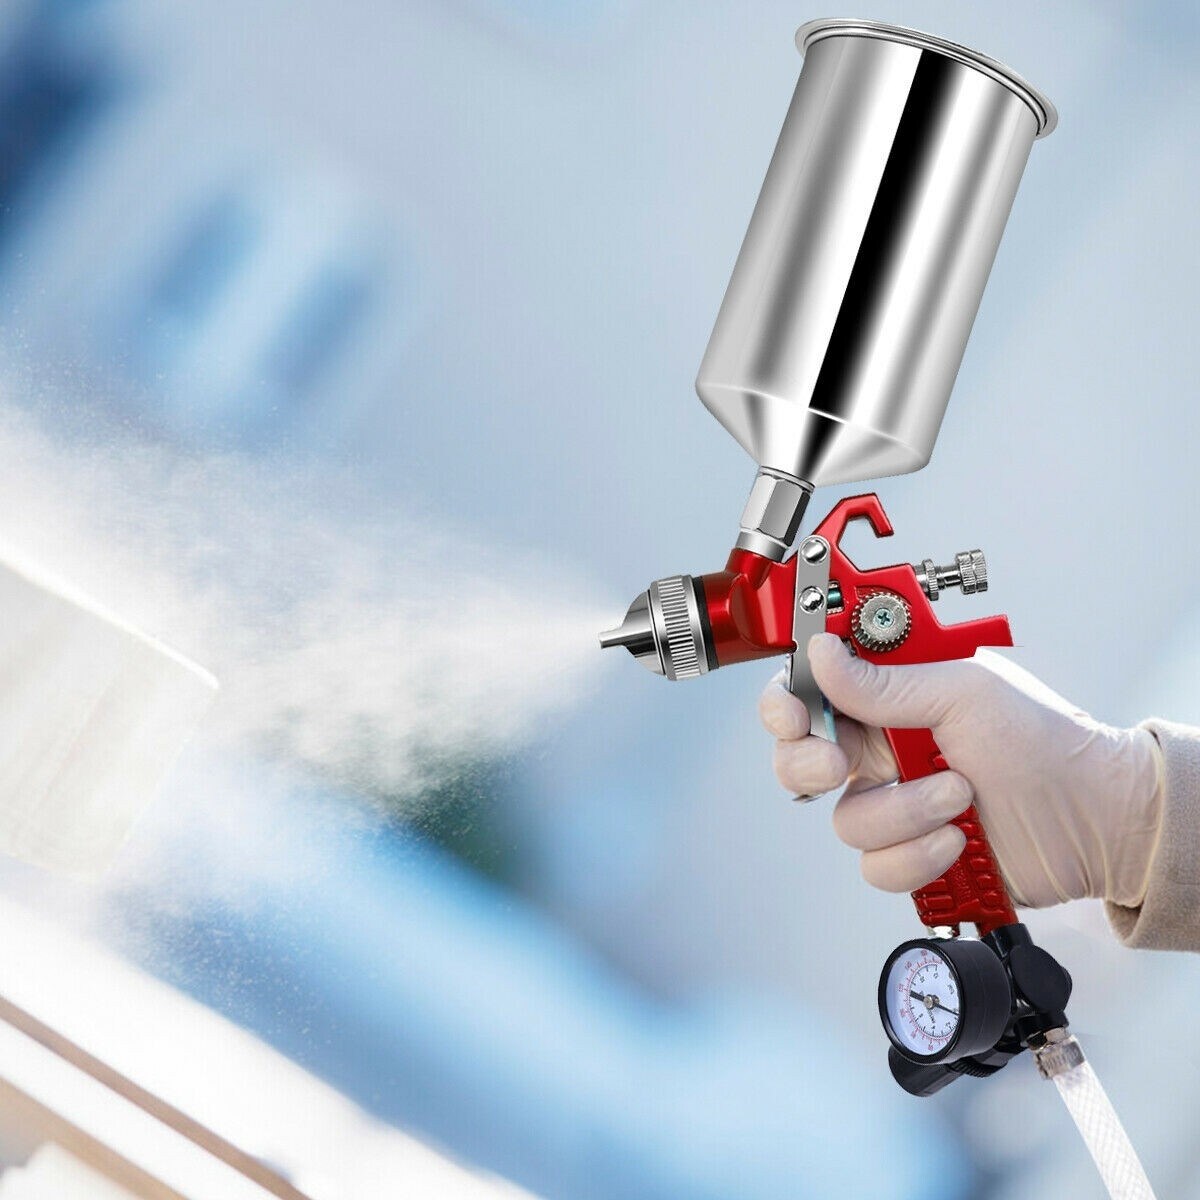 Compressed Air Spray Gun - 1.4mm Nozzle - Lightweight HVLP Automotive Paint Spray Gun for Base Coats Clear Coats - Includes Air Pipe Con